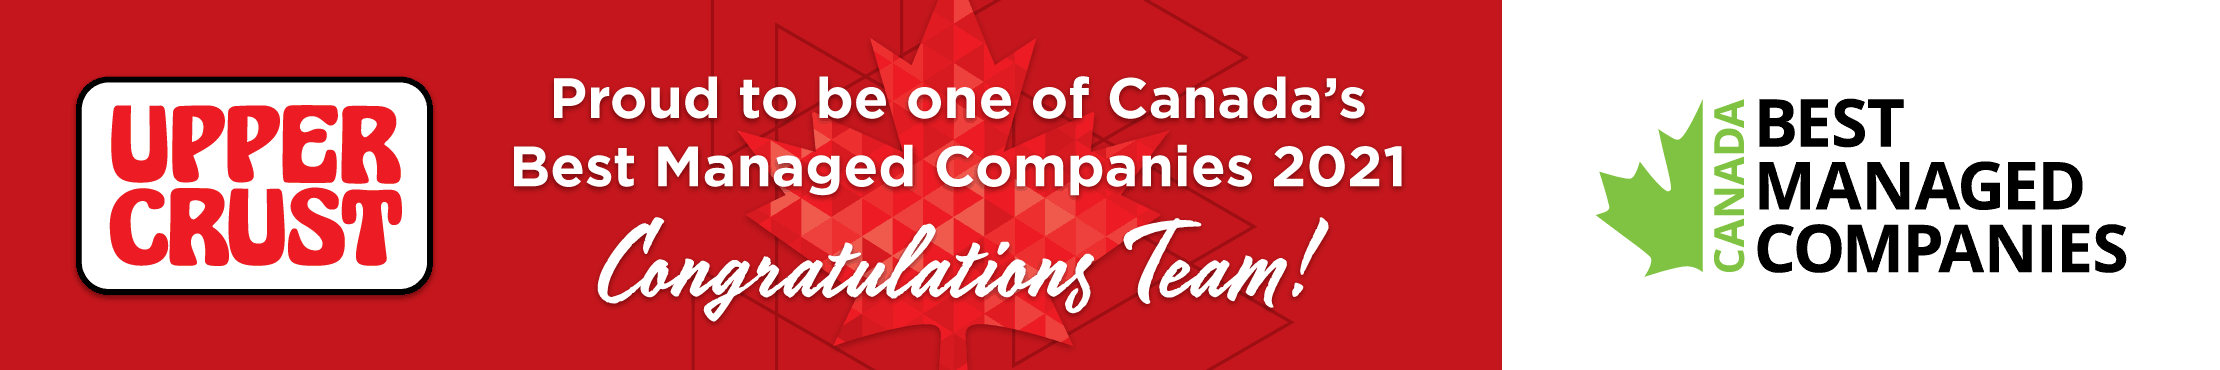 Upper Crust is proud to be one of Canada's Best Managed Companies 2021